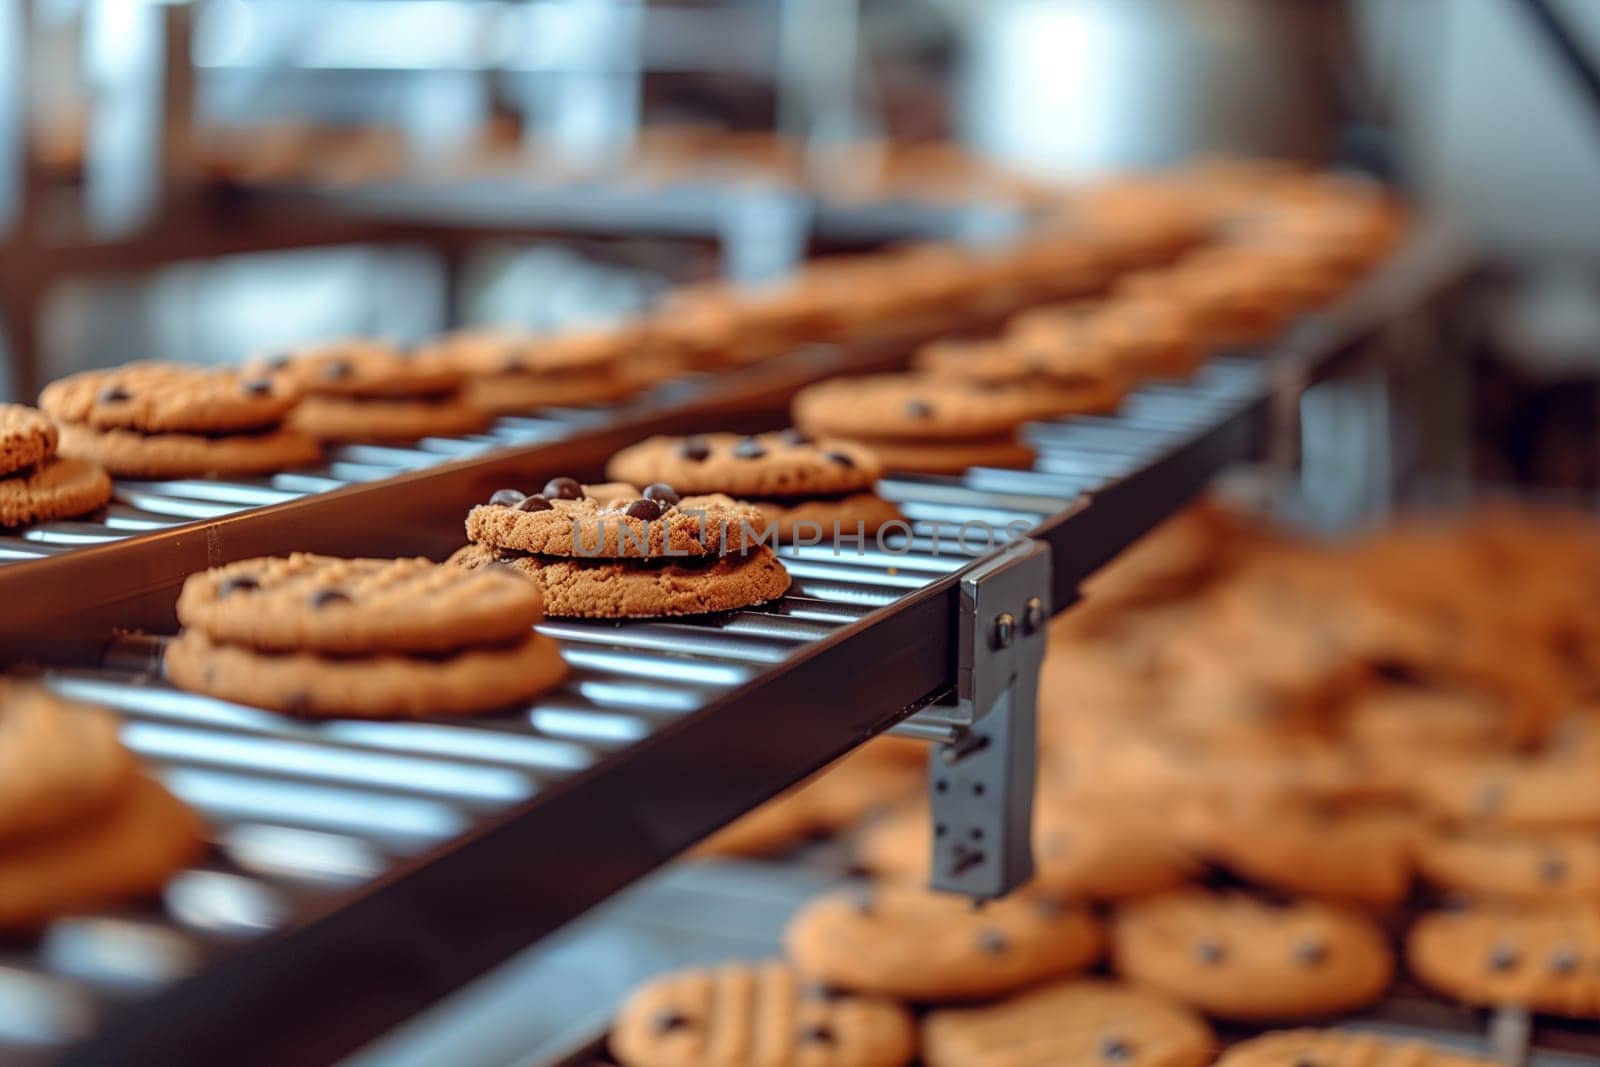 Rows of Cookies on Conveyor Belt by Sd28DimoN_1976